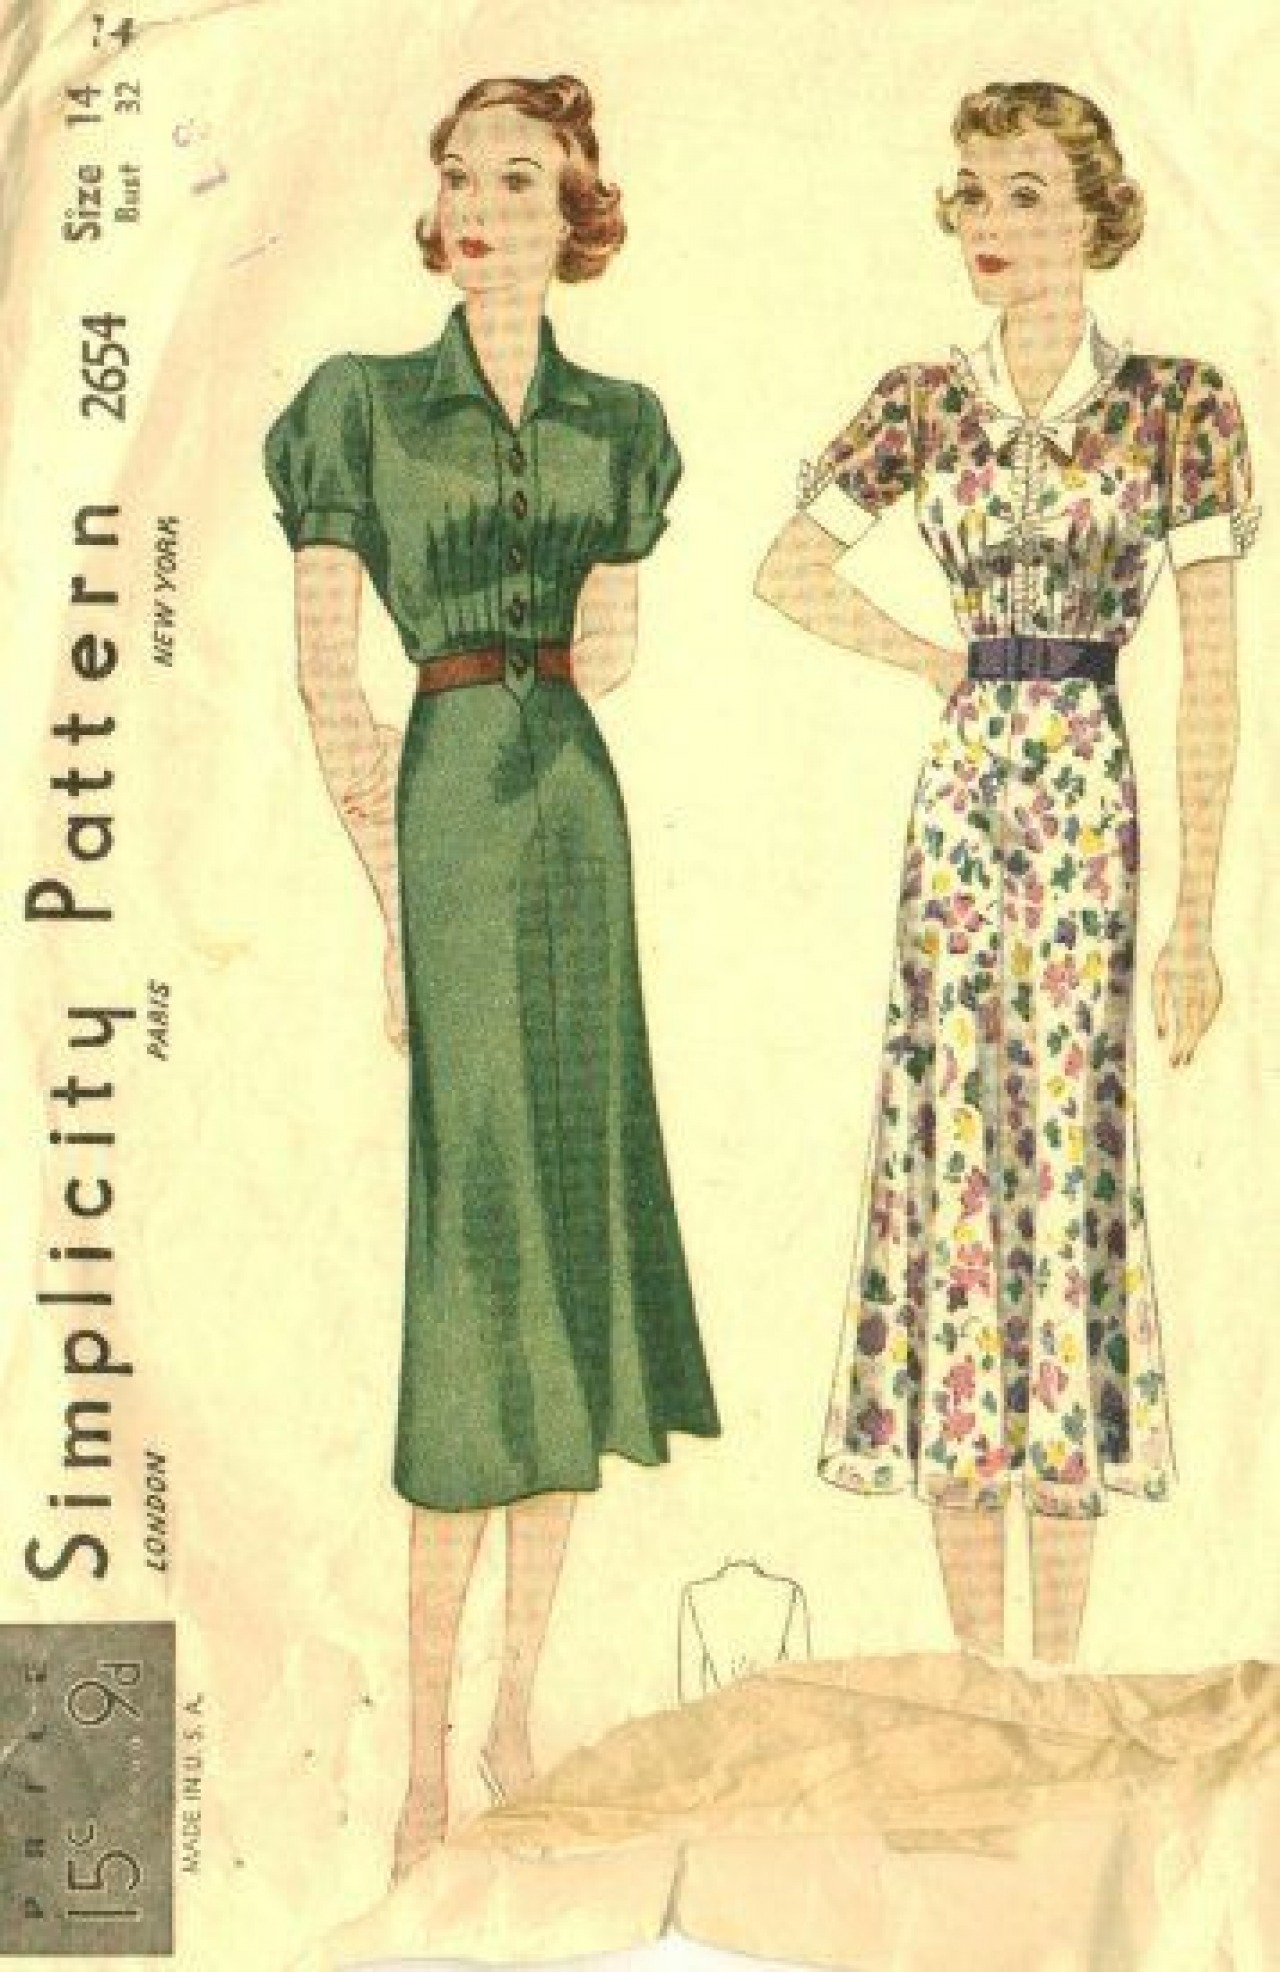 Silhouettes: 1930s-1940s women  Fashion and Decor: A Cultural History